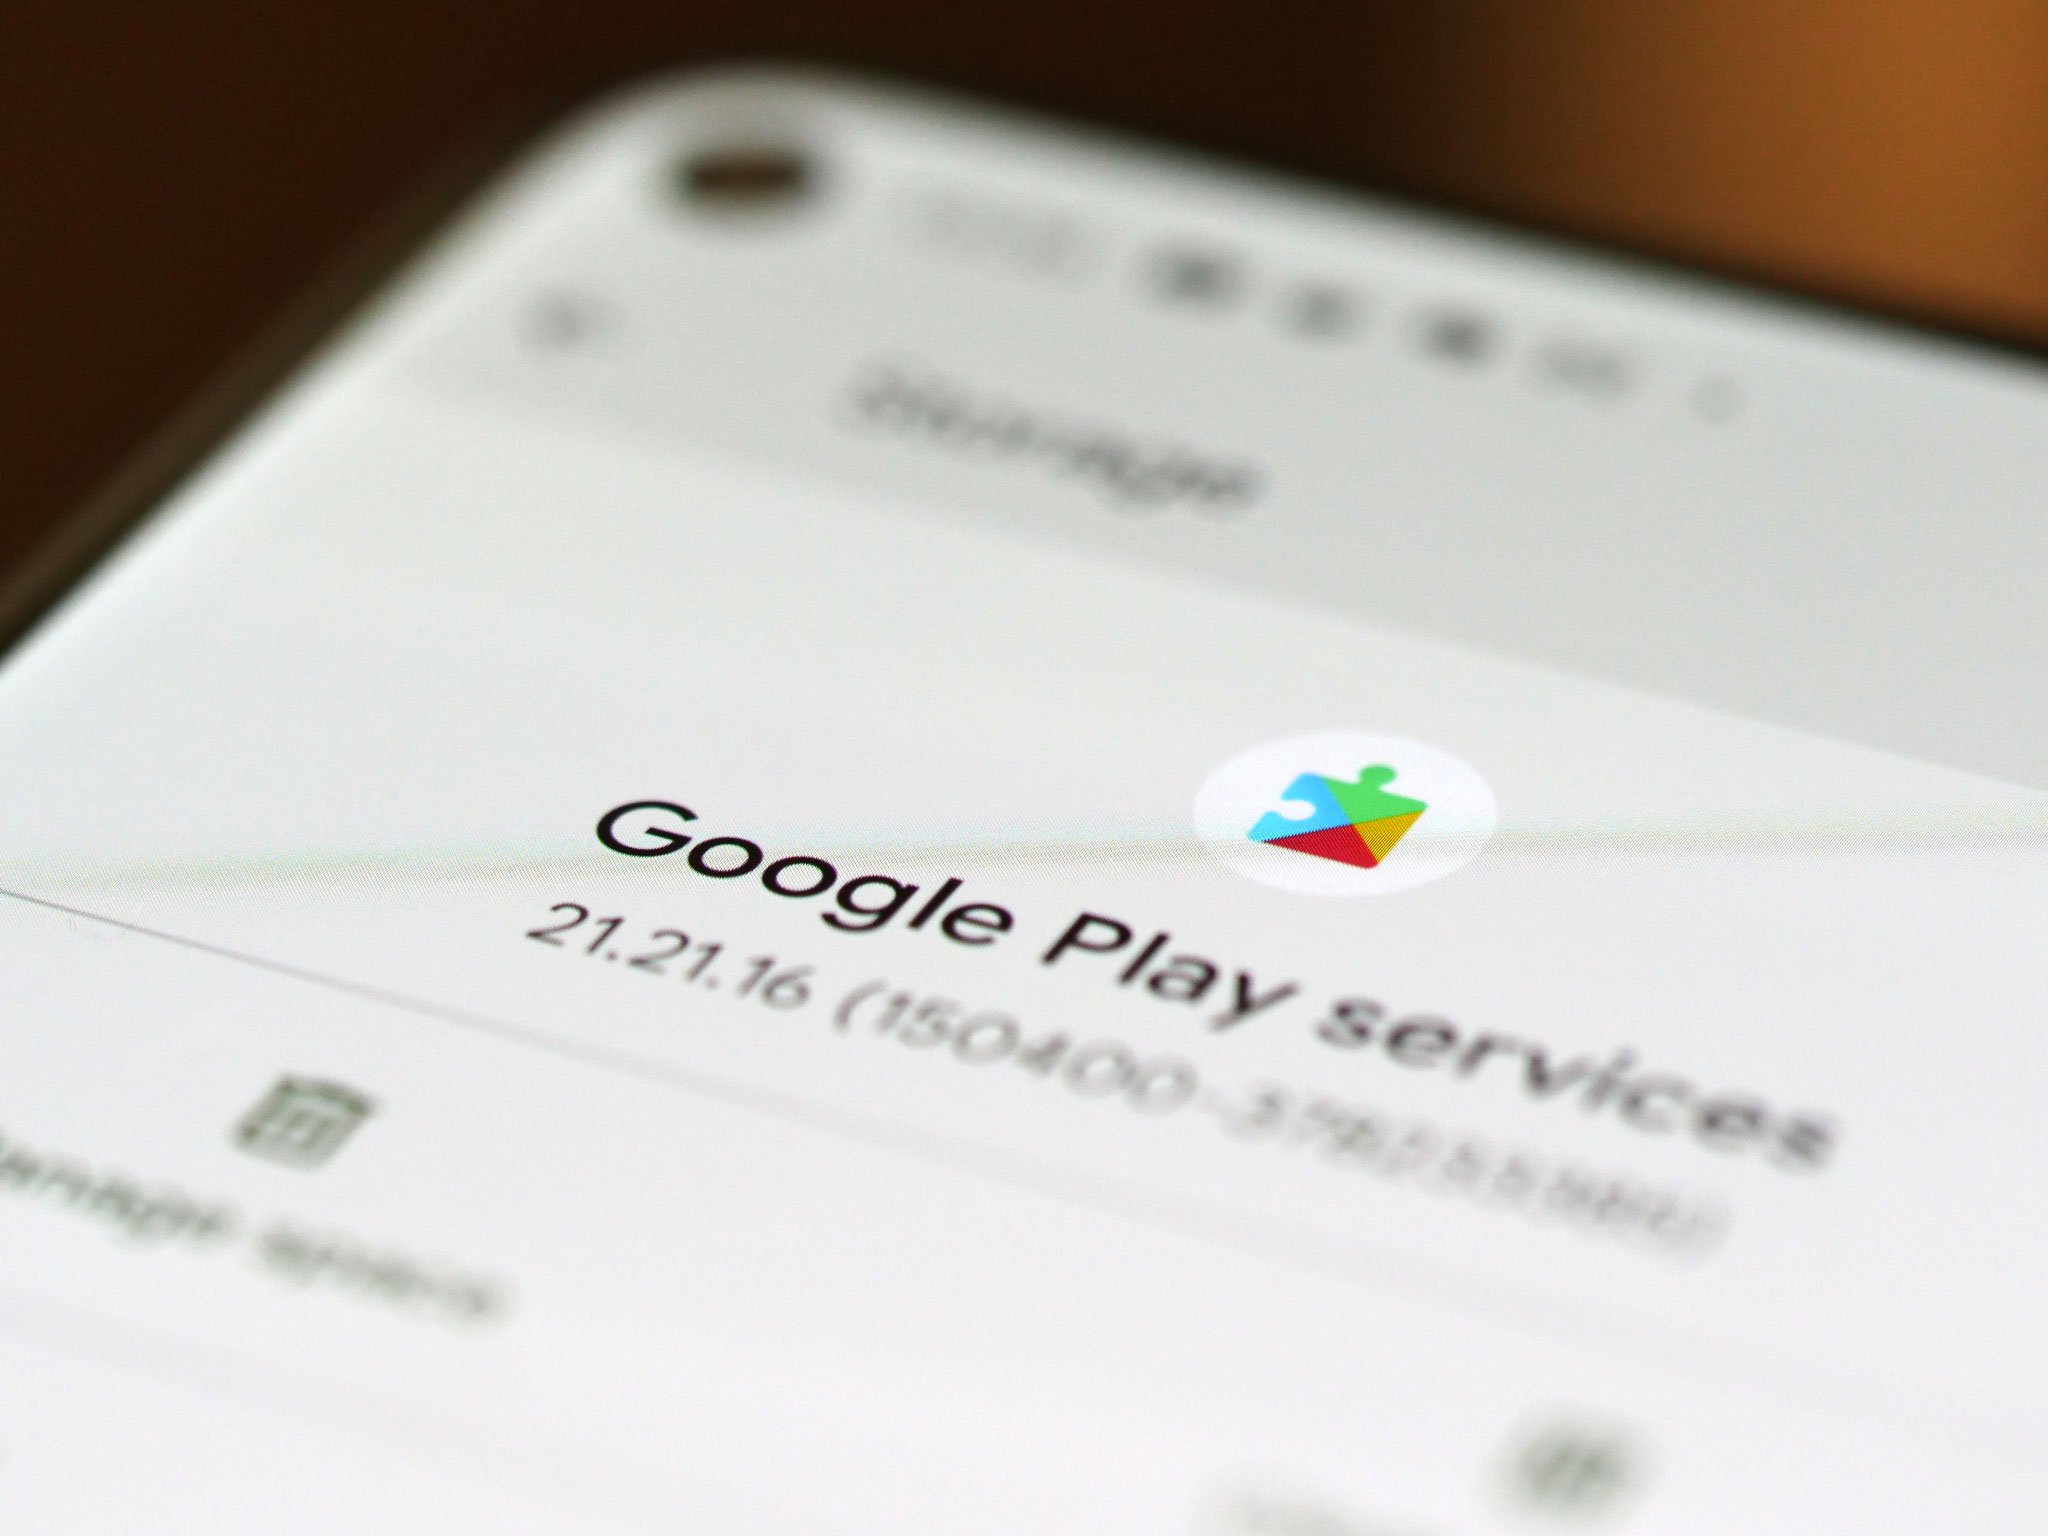 Google Play Services is the new Android platform